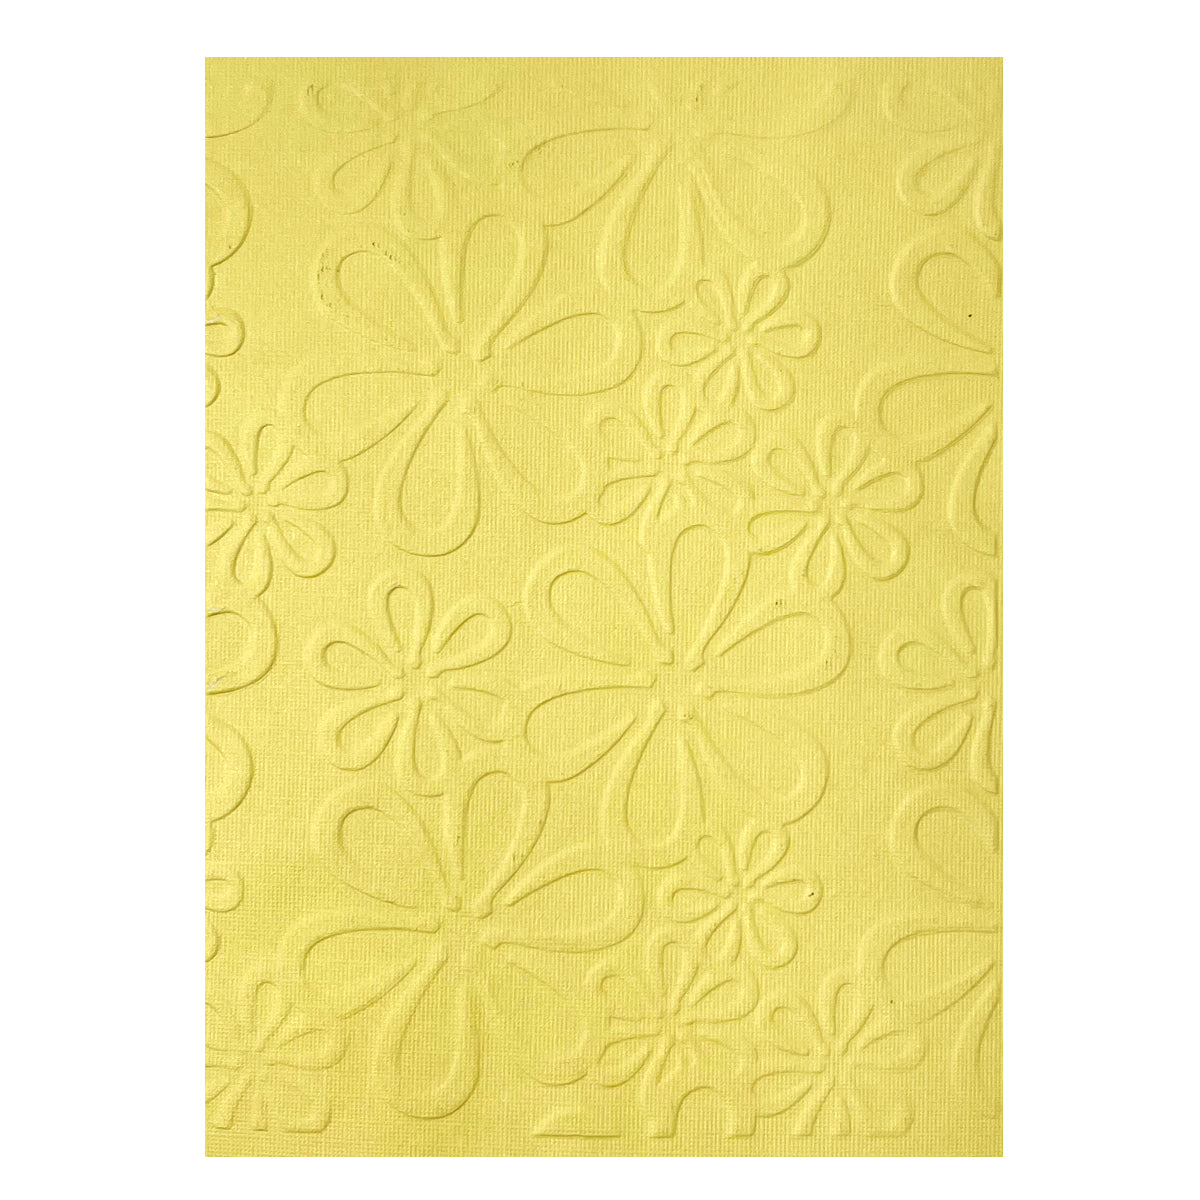 Wrapables Embossing Folder Paper Stamp Template for Scrapbooking, Card Making, DIY Arts & Crafts (Set of 2)